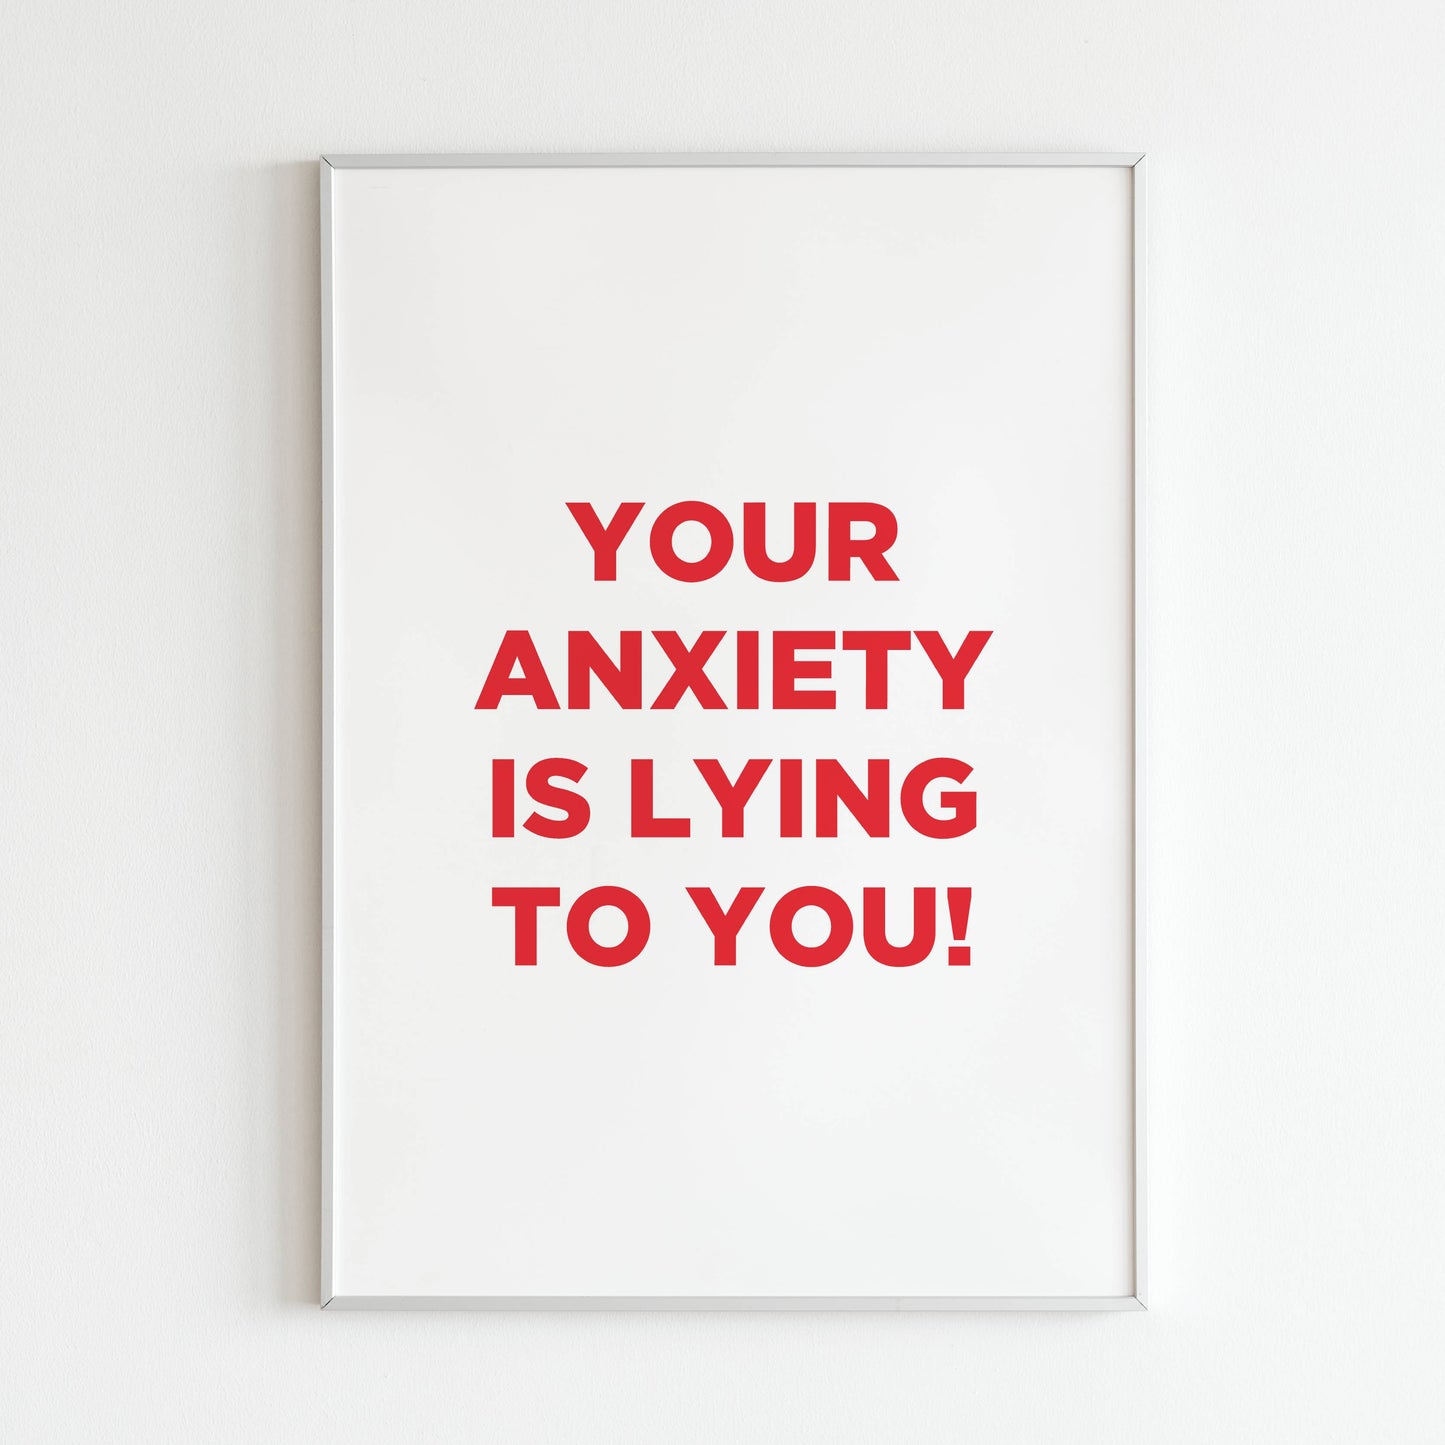 Downloadable inspirational wall art for overcoming anxiety